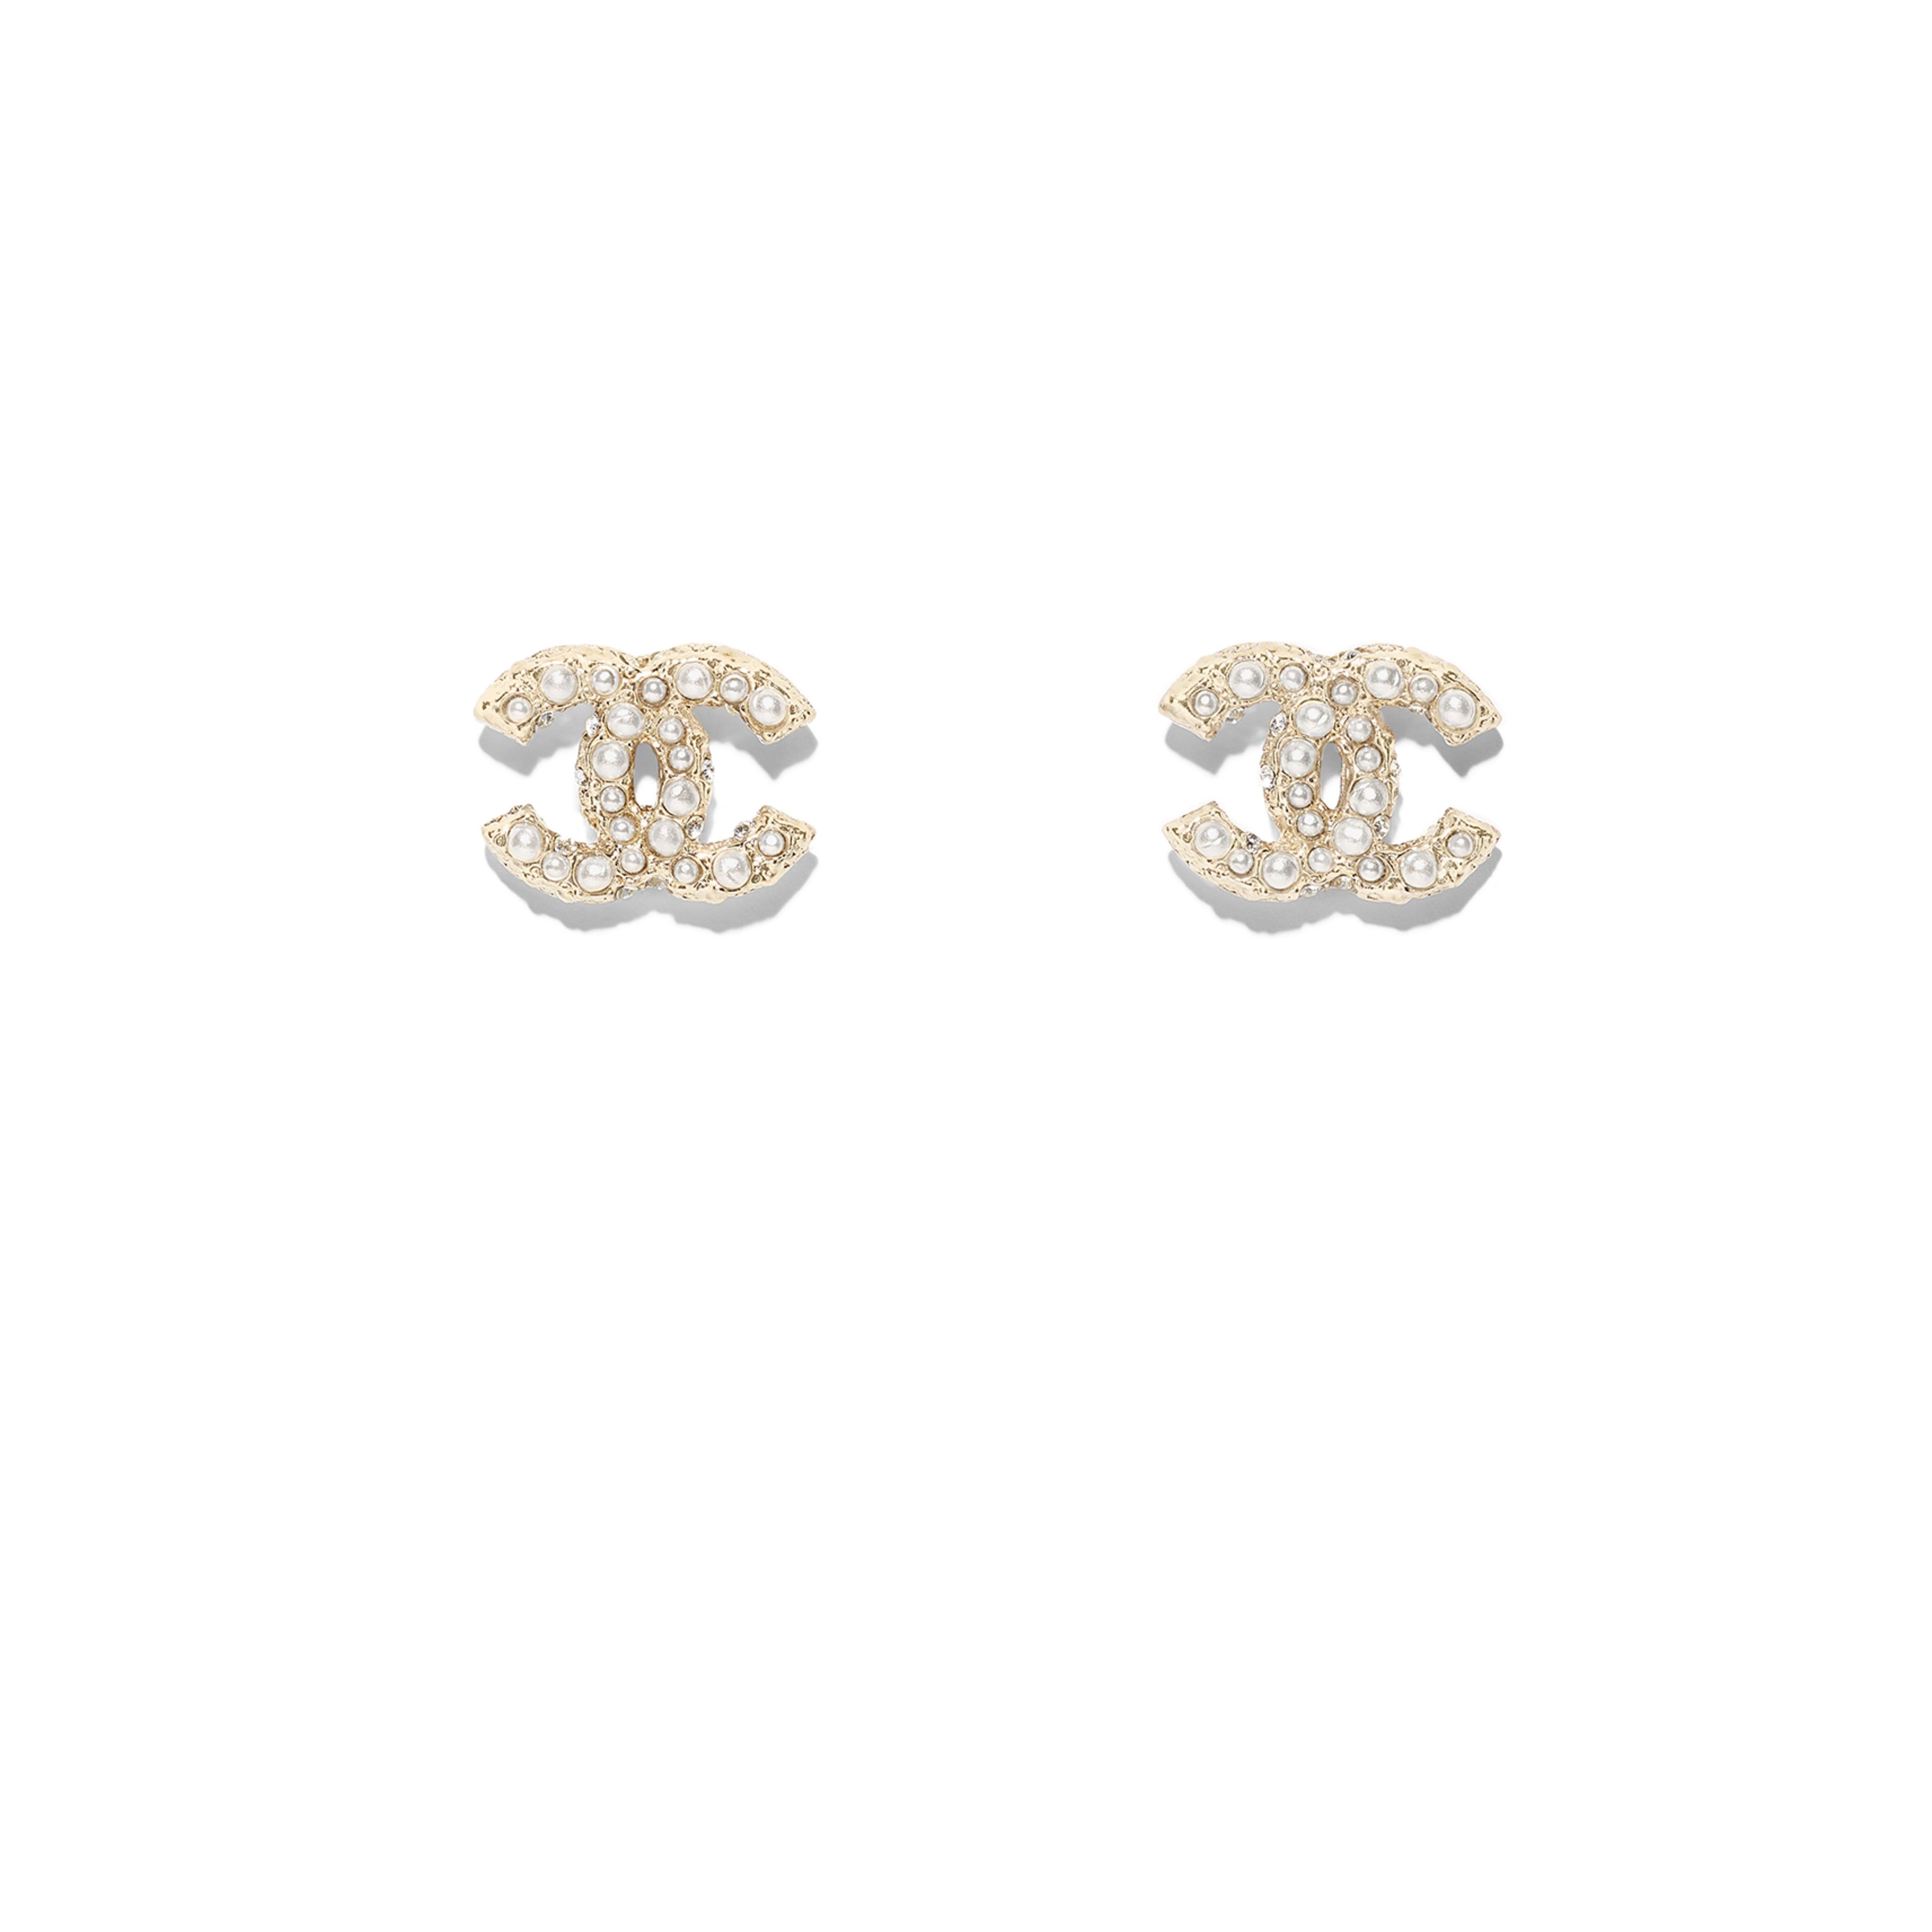 Metal, Strass & Resin Gold & Pearly White Earrings | CHANEL | Chanel, Inc. (US)